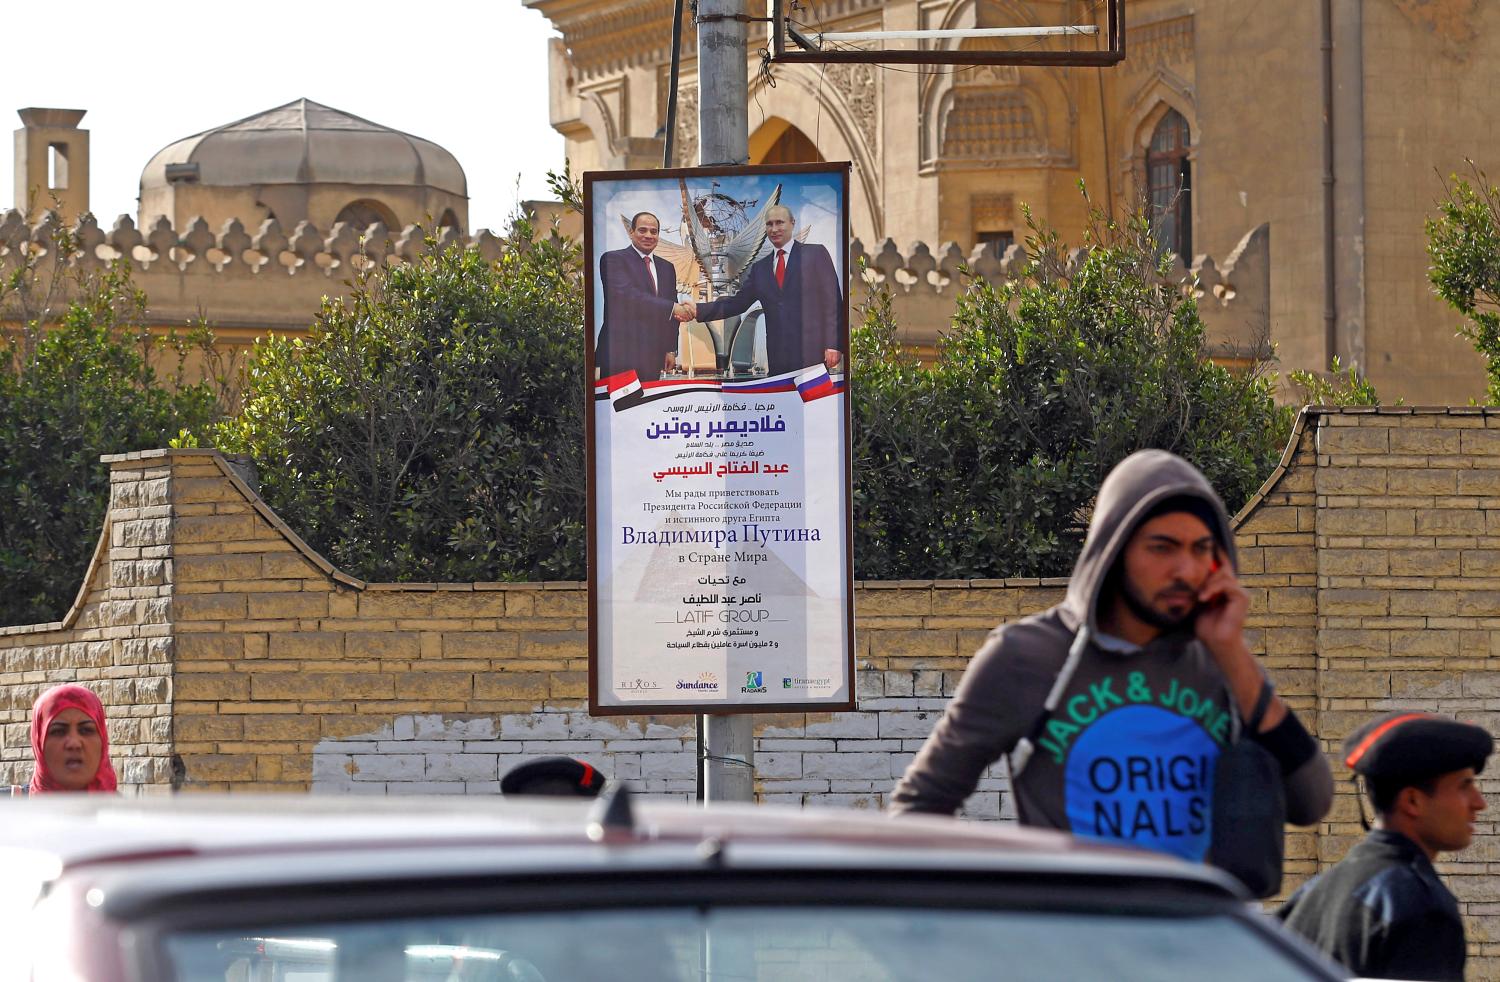 Posters of Russian President Vladimir Putin hang on the streets of Egypt's capital ahead of his meeting with his Egyptian counterpart President Abdel Fattah al-Sisi in Cairo, Egypt December 11, 2017. REUTERS/Mohamed Abd El Ghany - RC119911E330